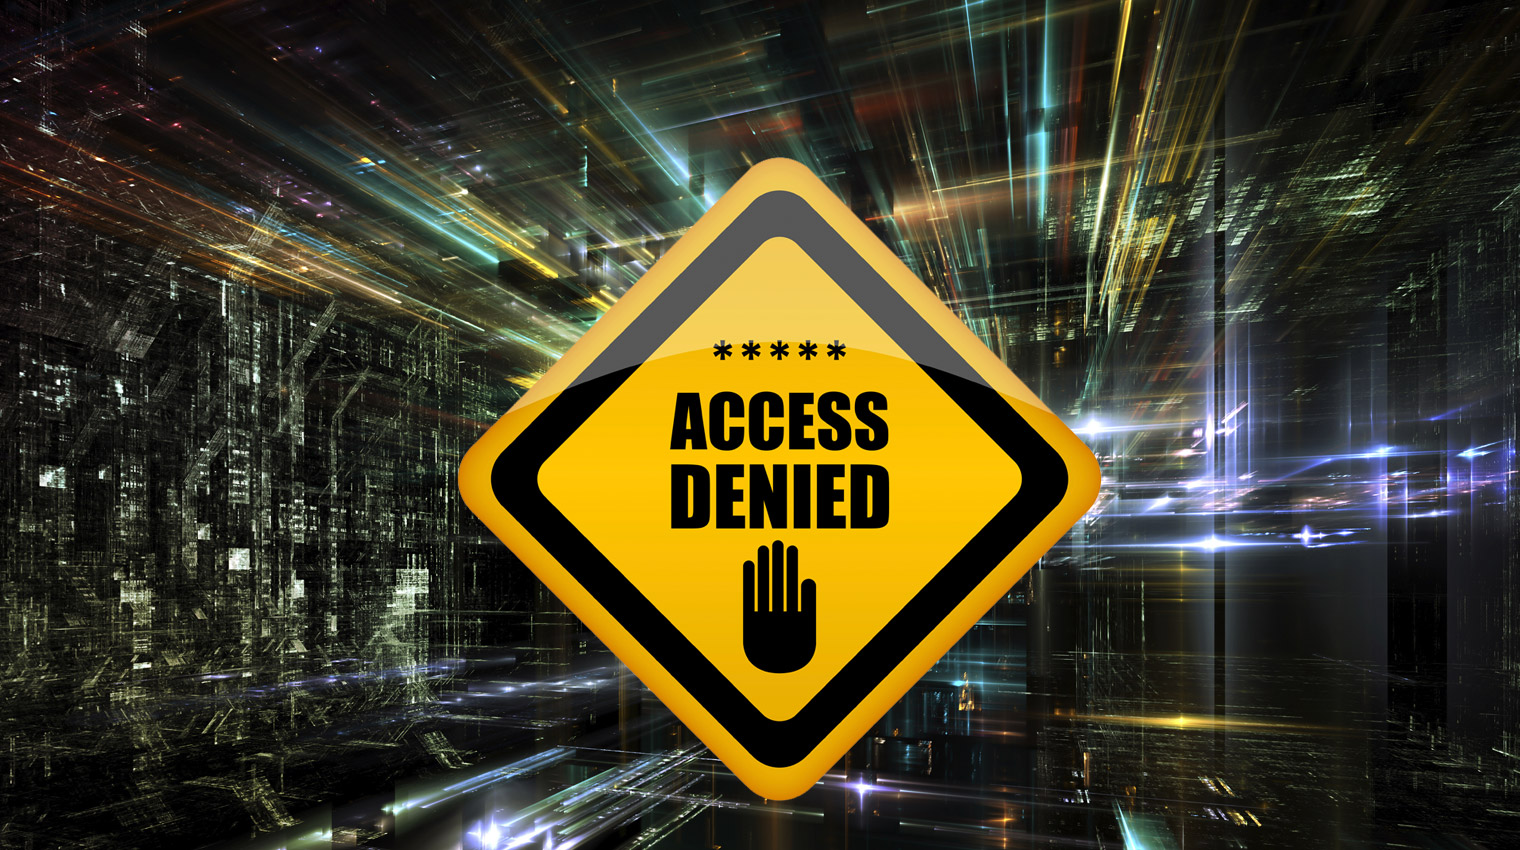 Access rejected. Доступ запрещен. Access denied. Access denied картинки. Обои доступ запрещен.